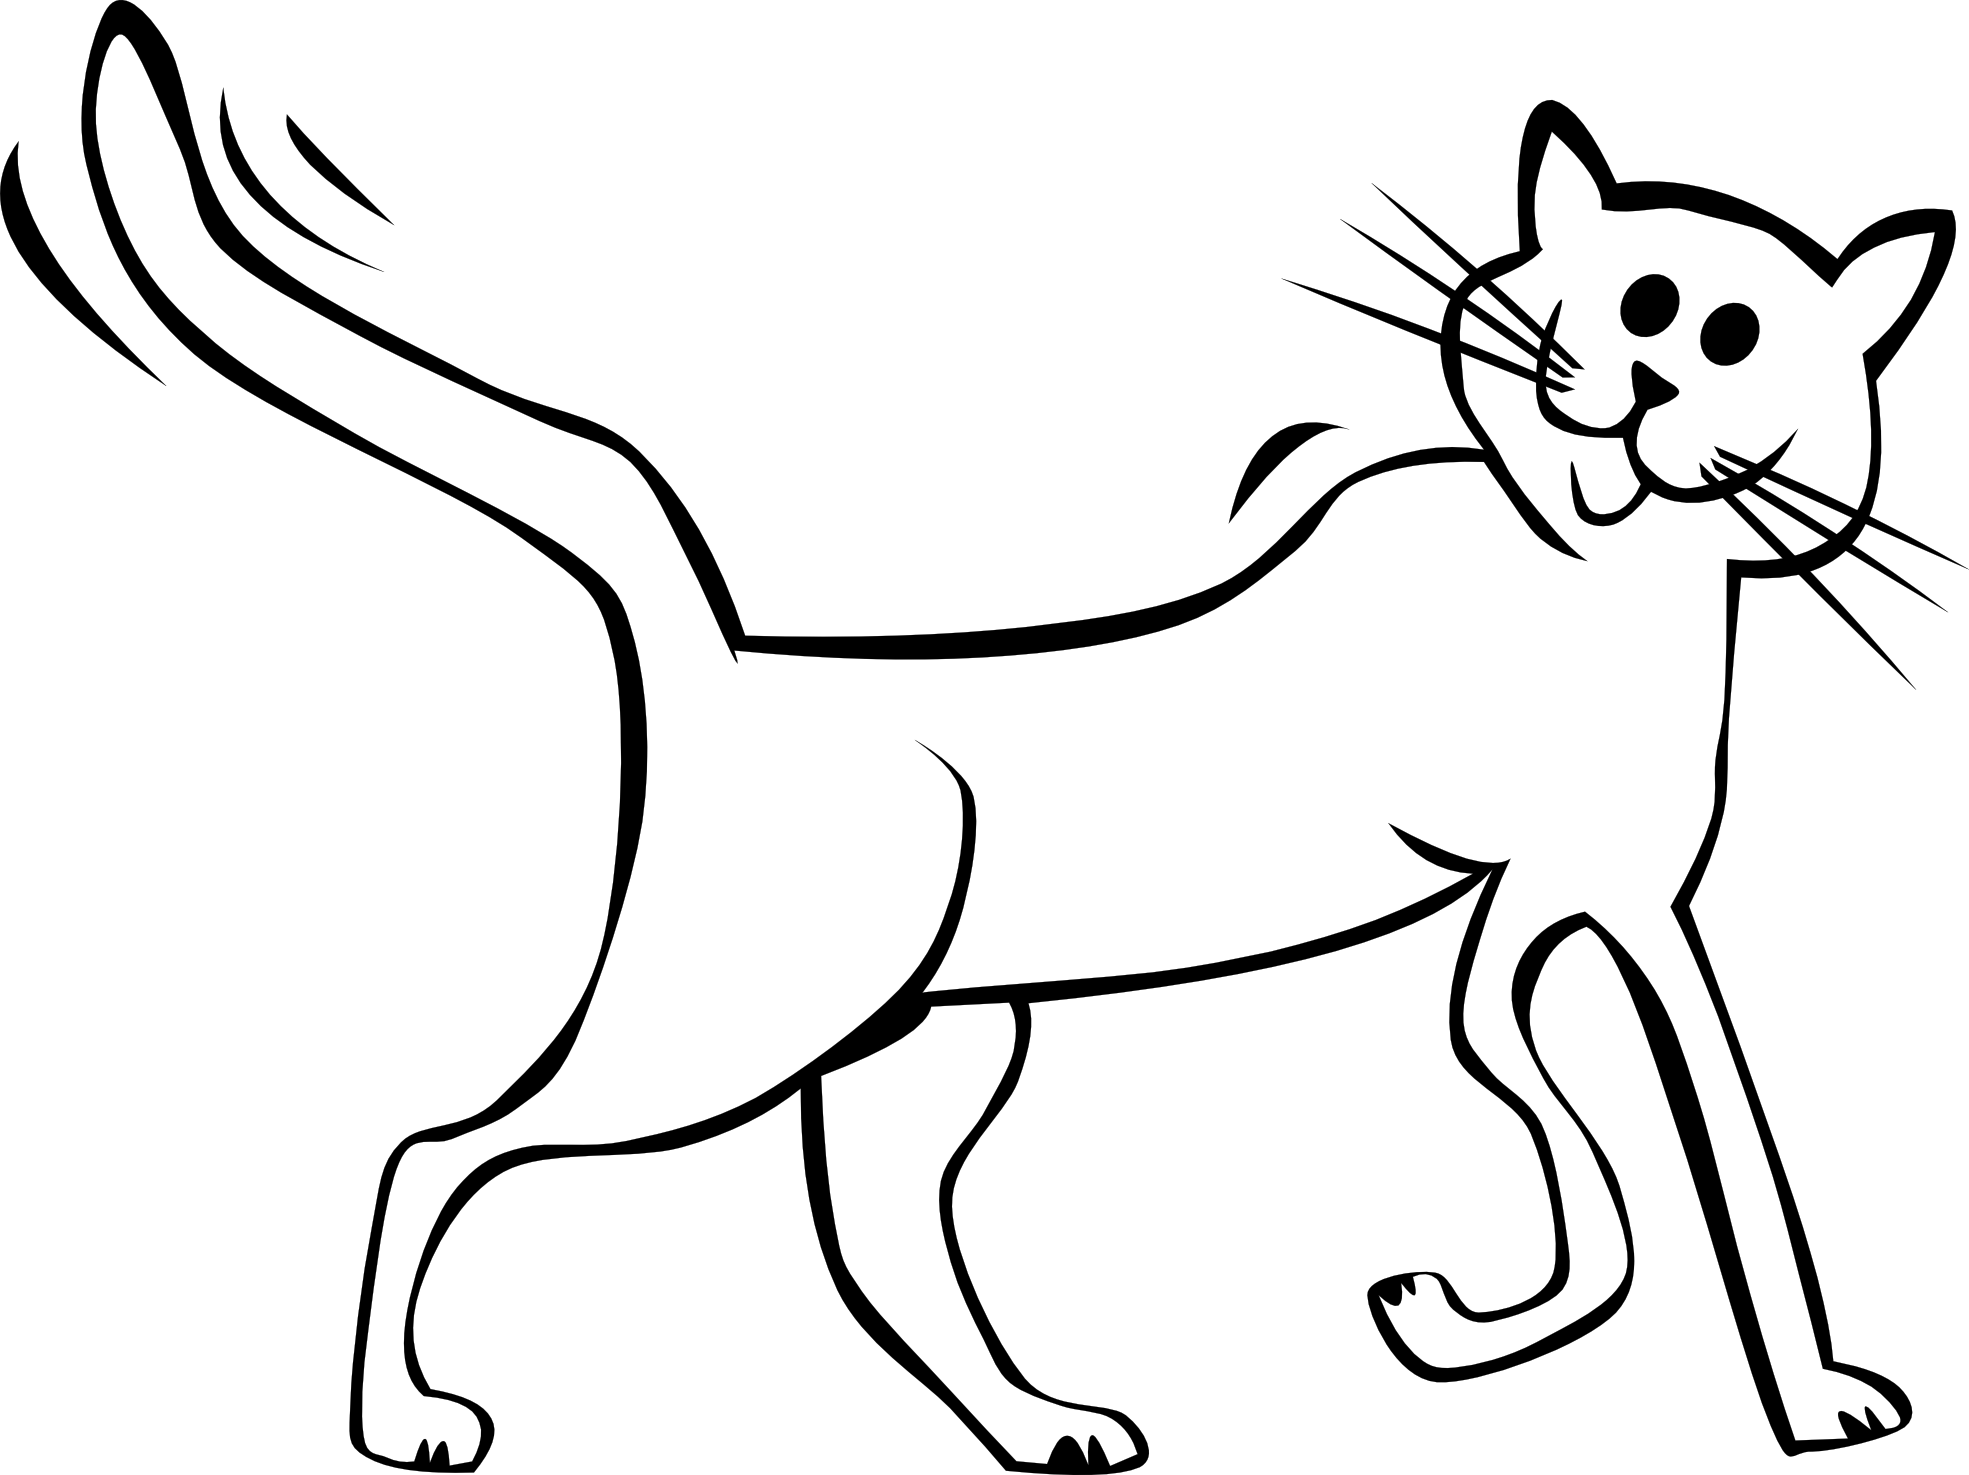 Black And White Cat Cartoon - Cliparts.co